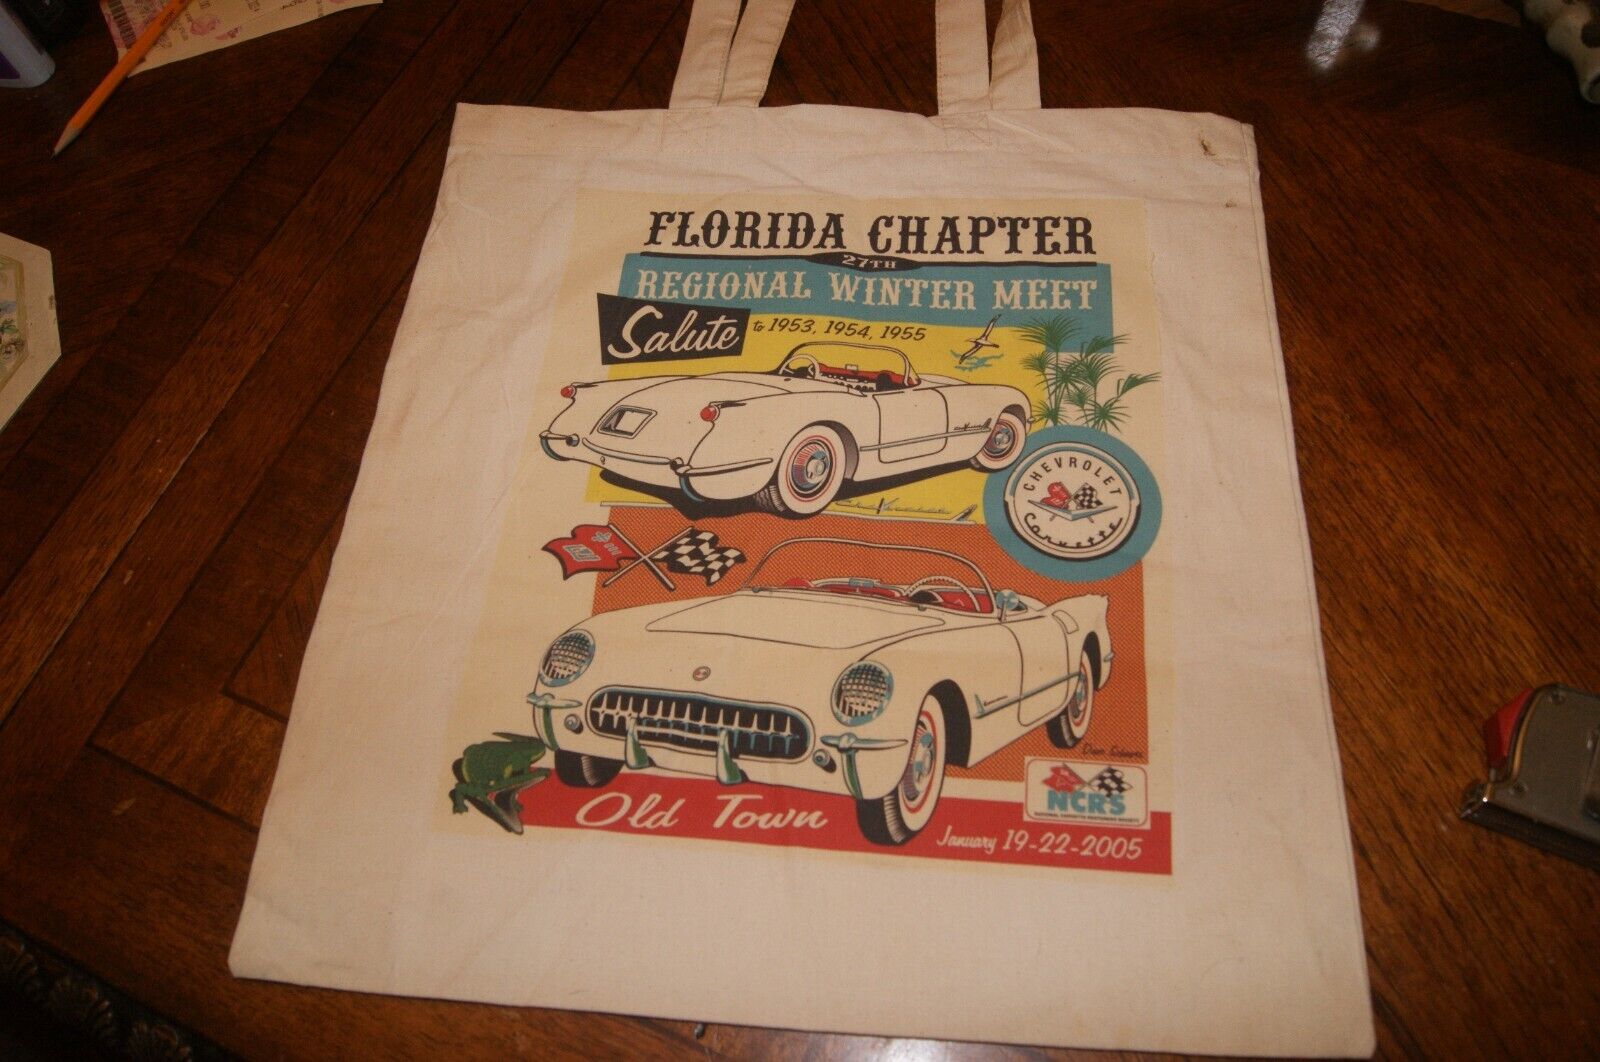 Original, never used, NCRS Florida Chapter Winter Meet tote bag - 2005